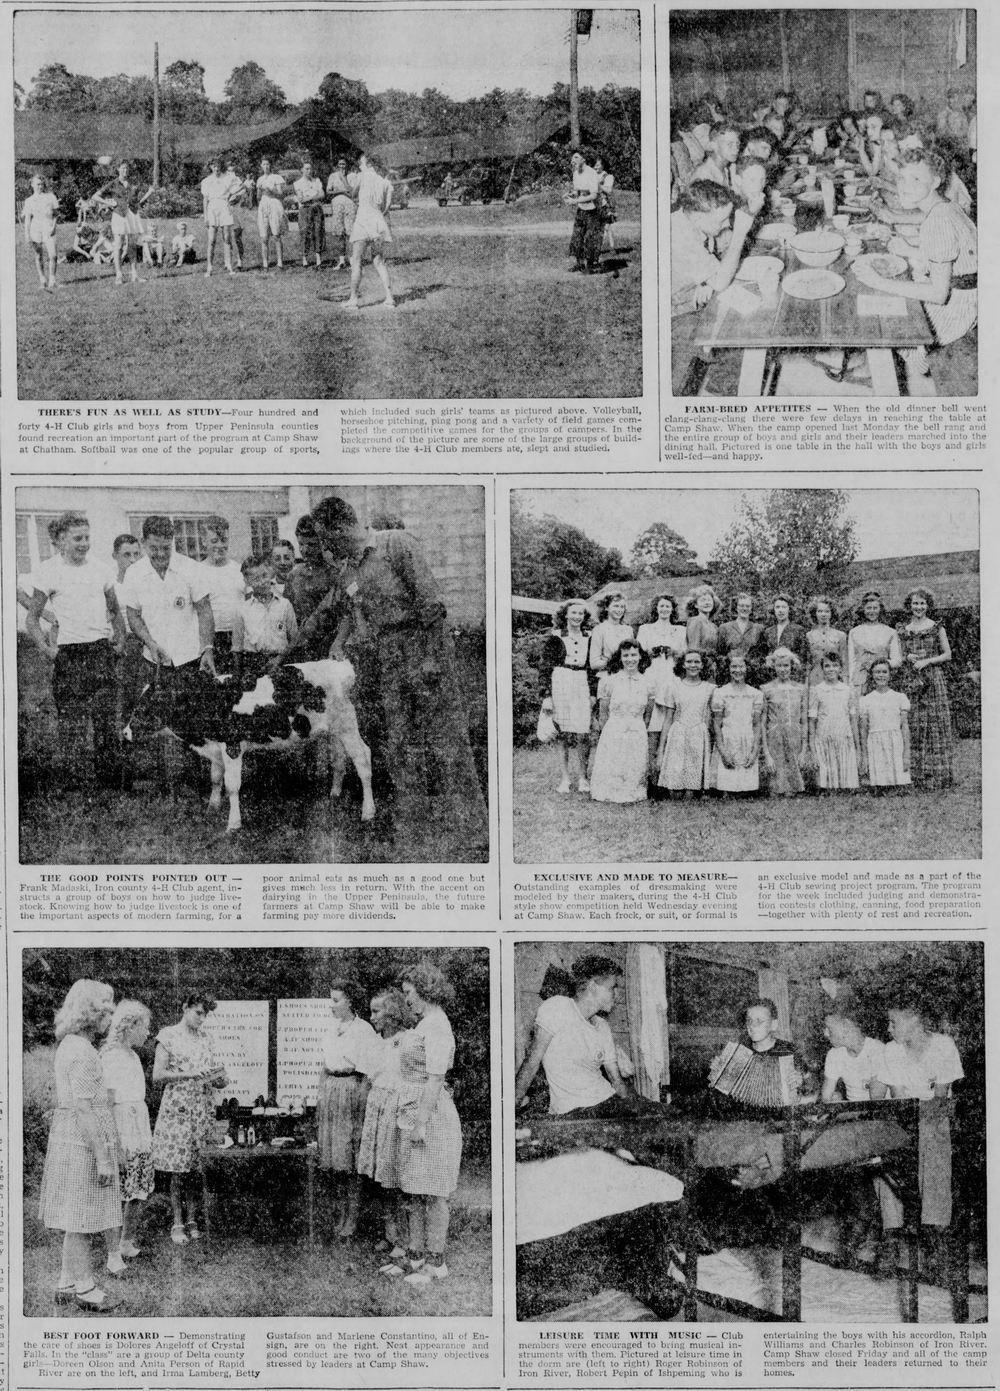 Camp Shaw - Aug 11 1946 Full Page Spread